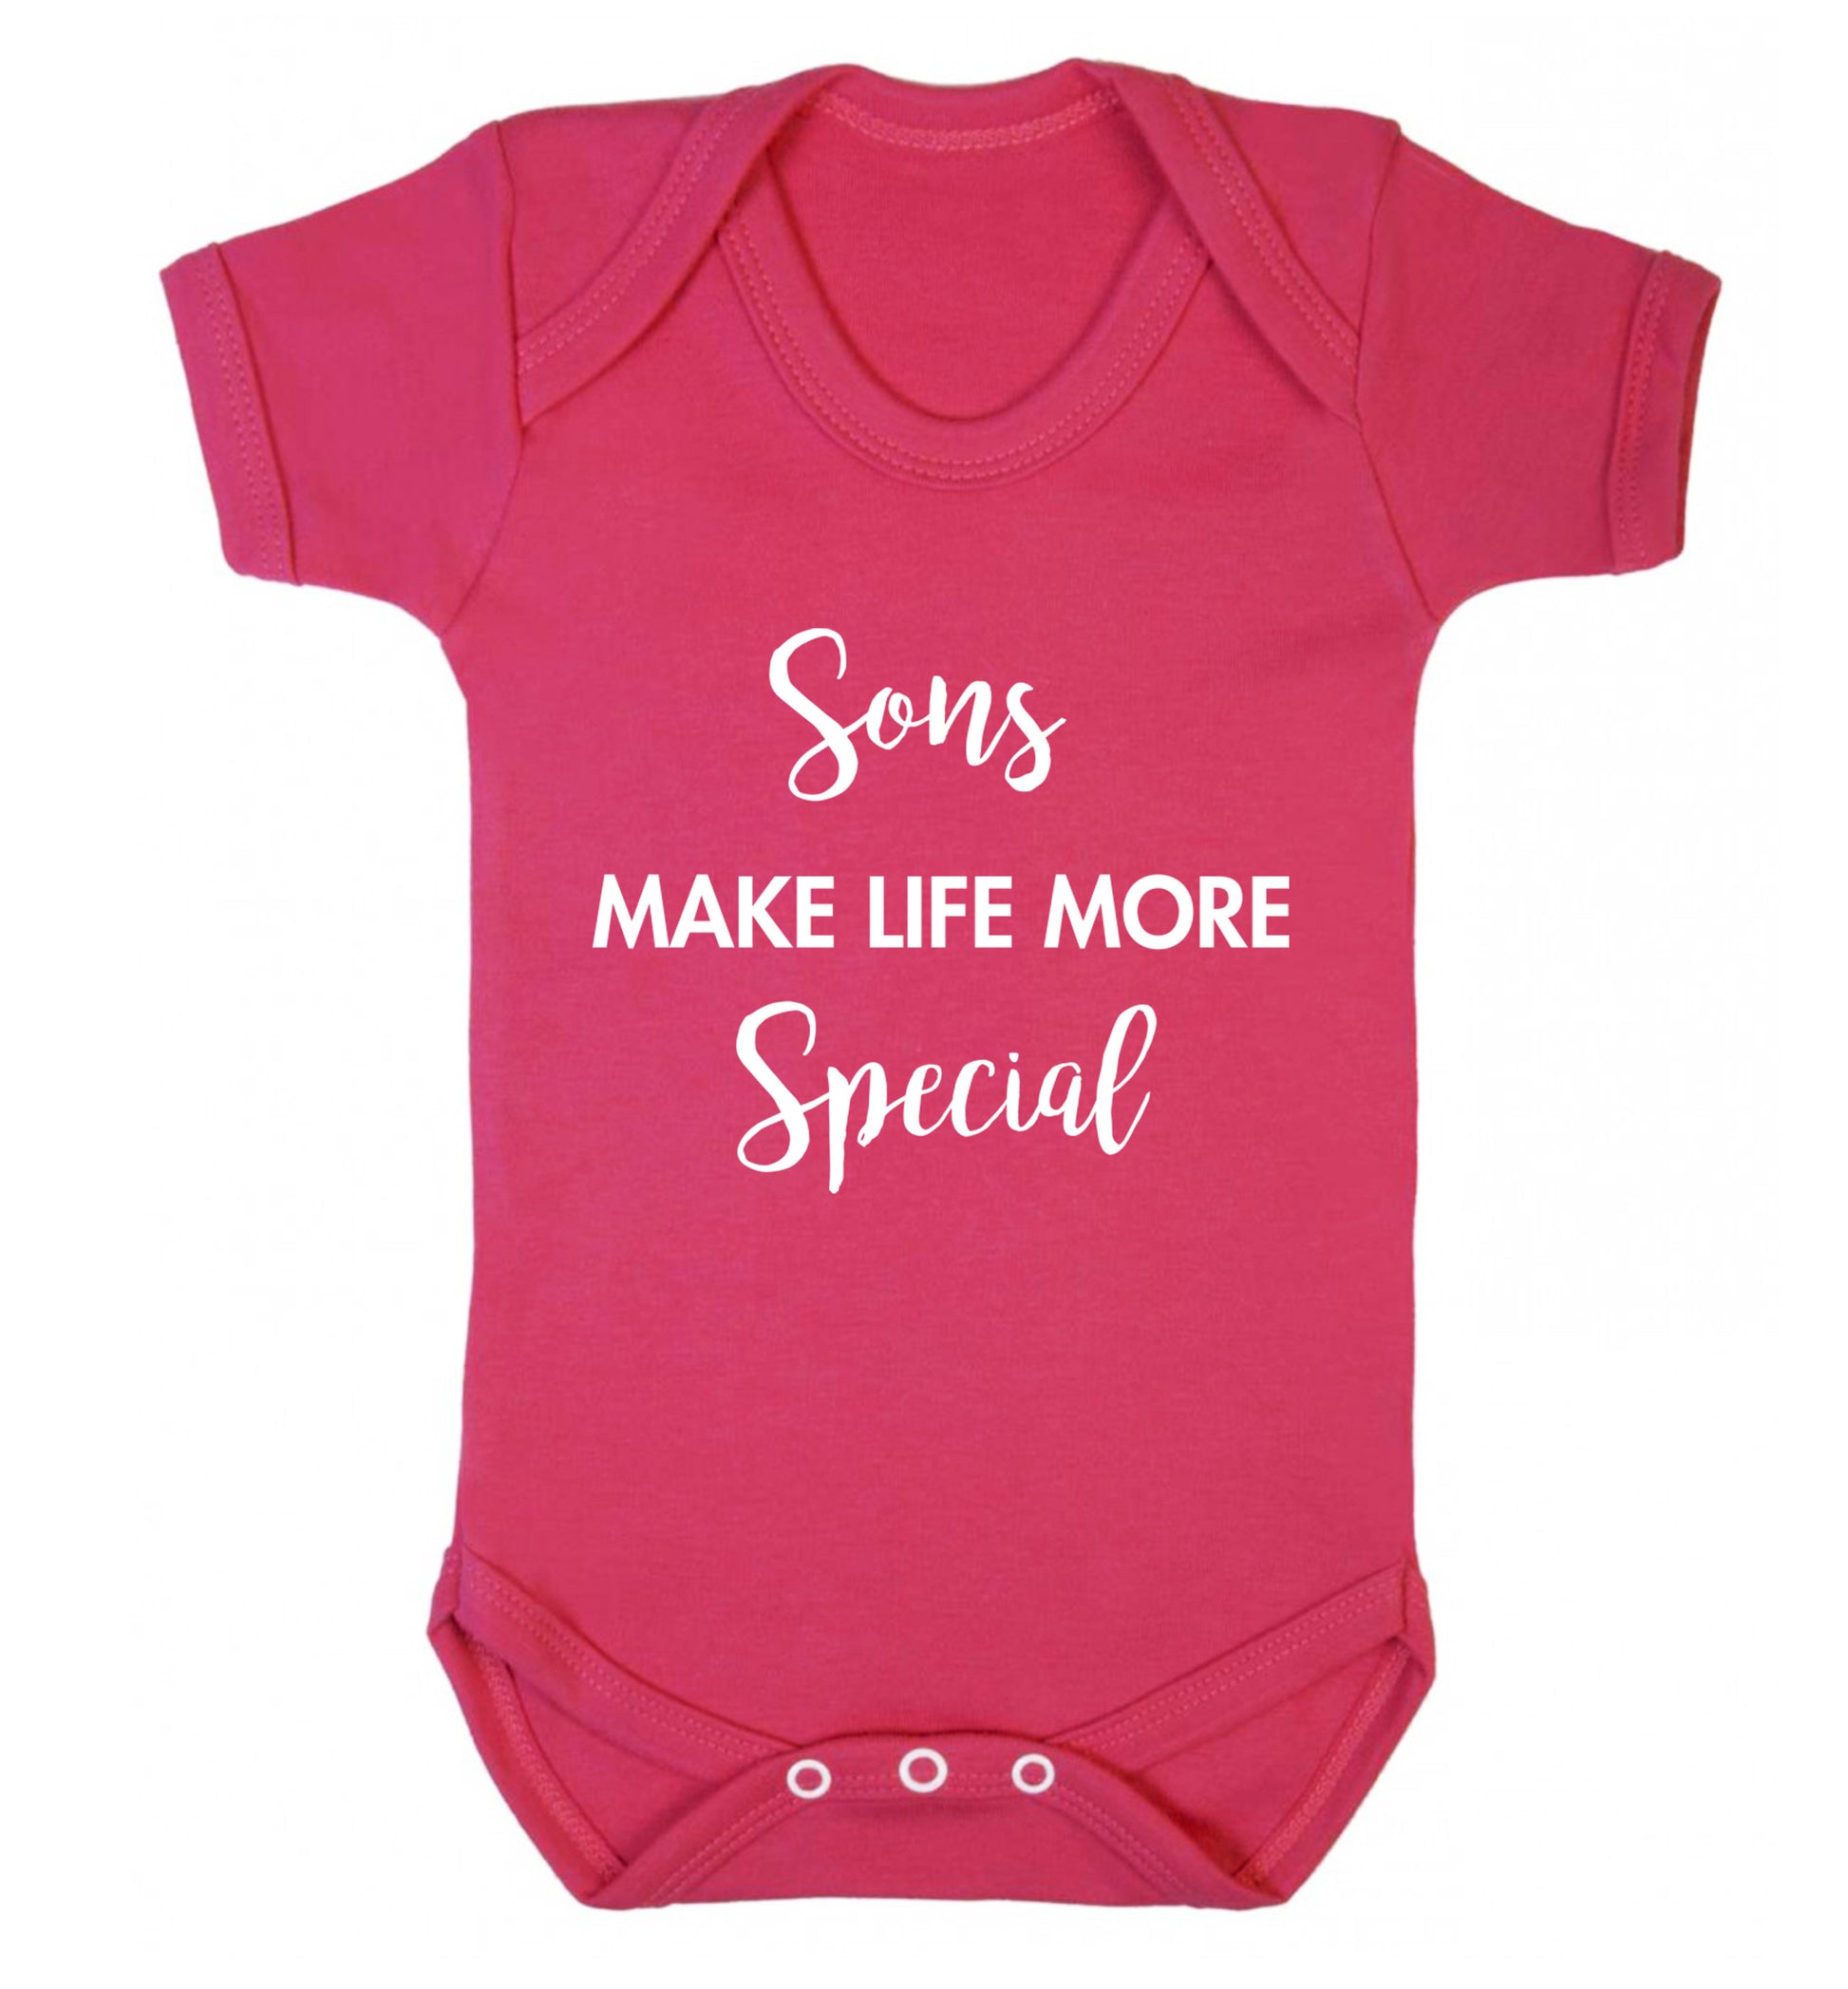 Daughters make life more special Baby Vest dark pink 18-24 months